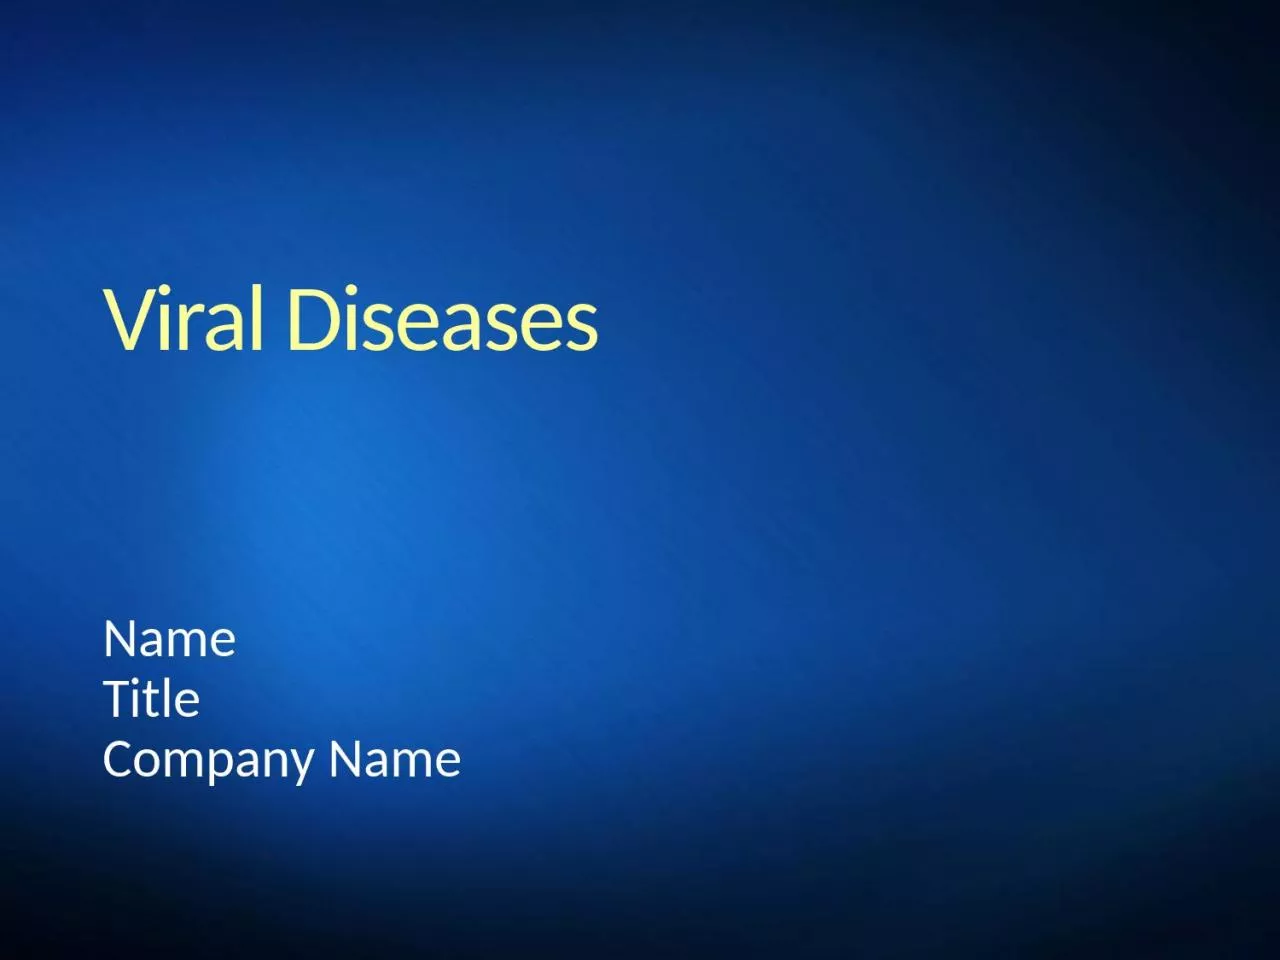 Viral Diseases Name Title